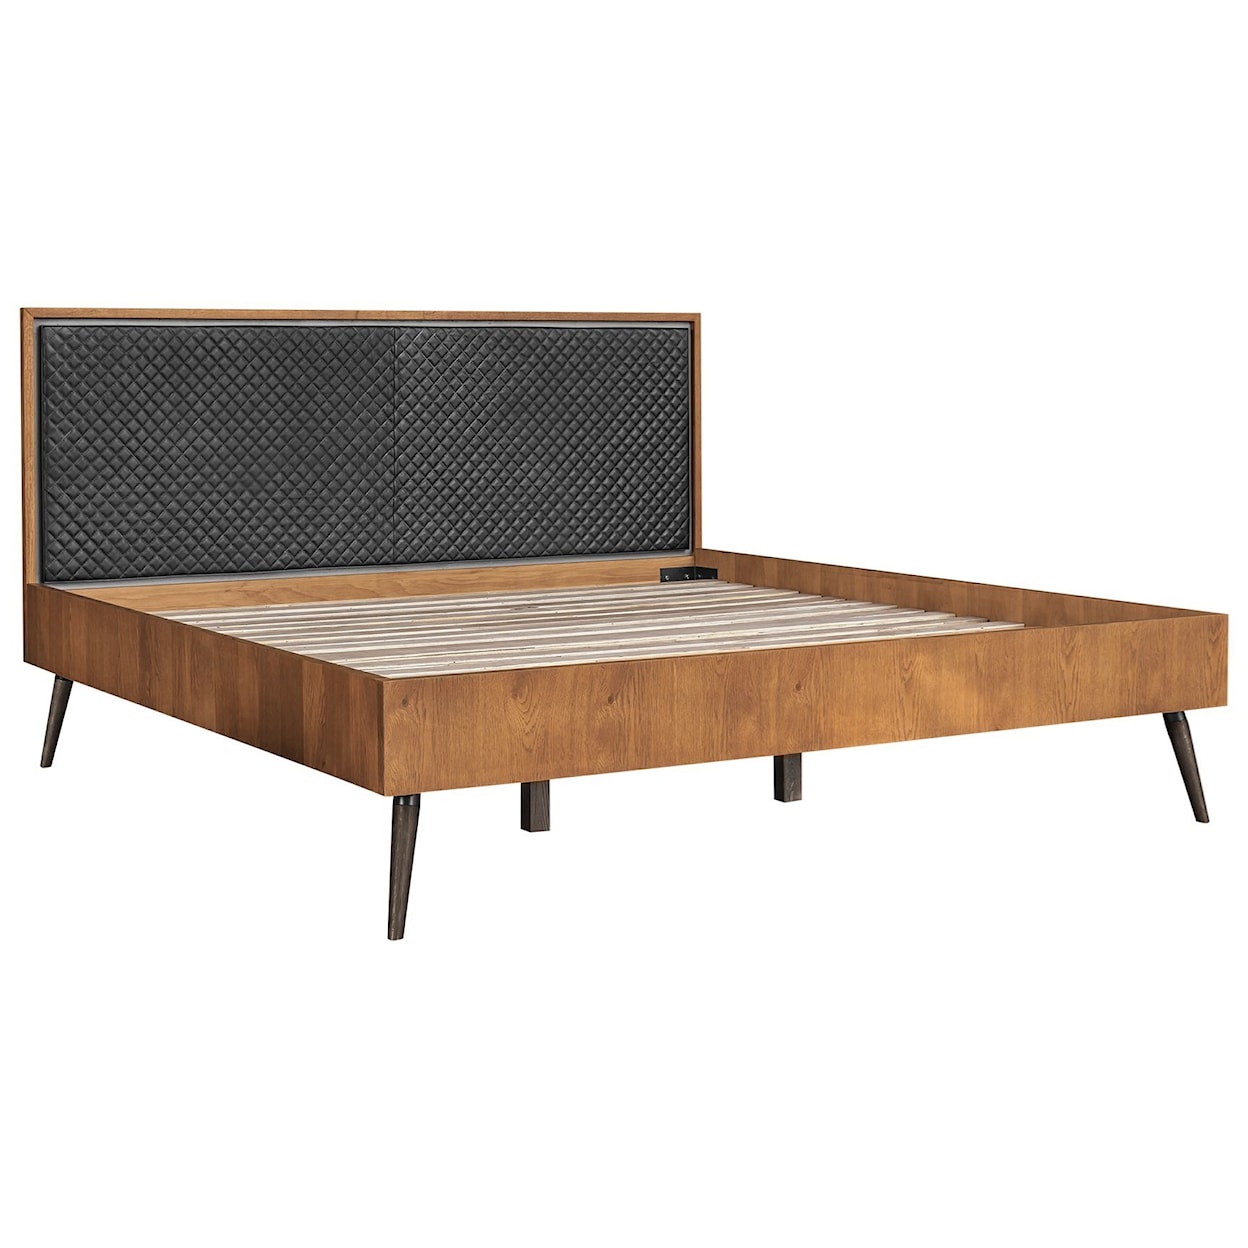 Armen Living Coco Upholstered King Bed